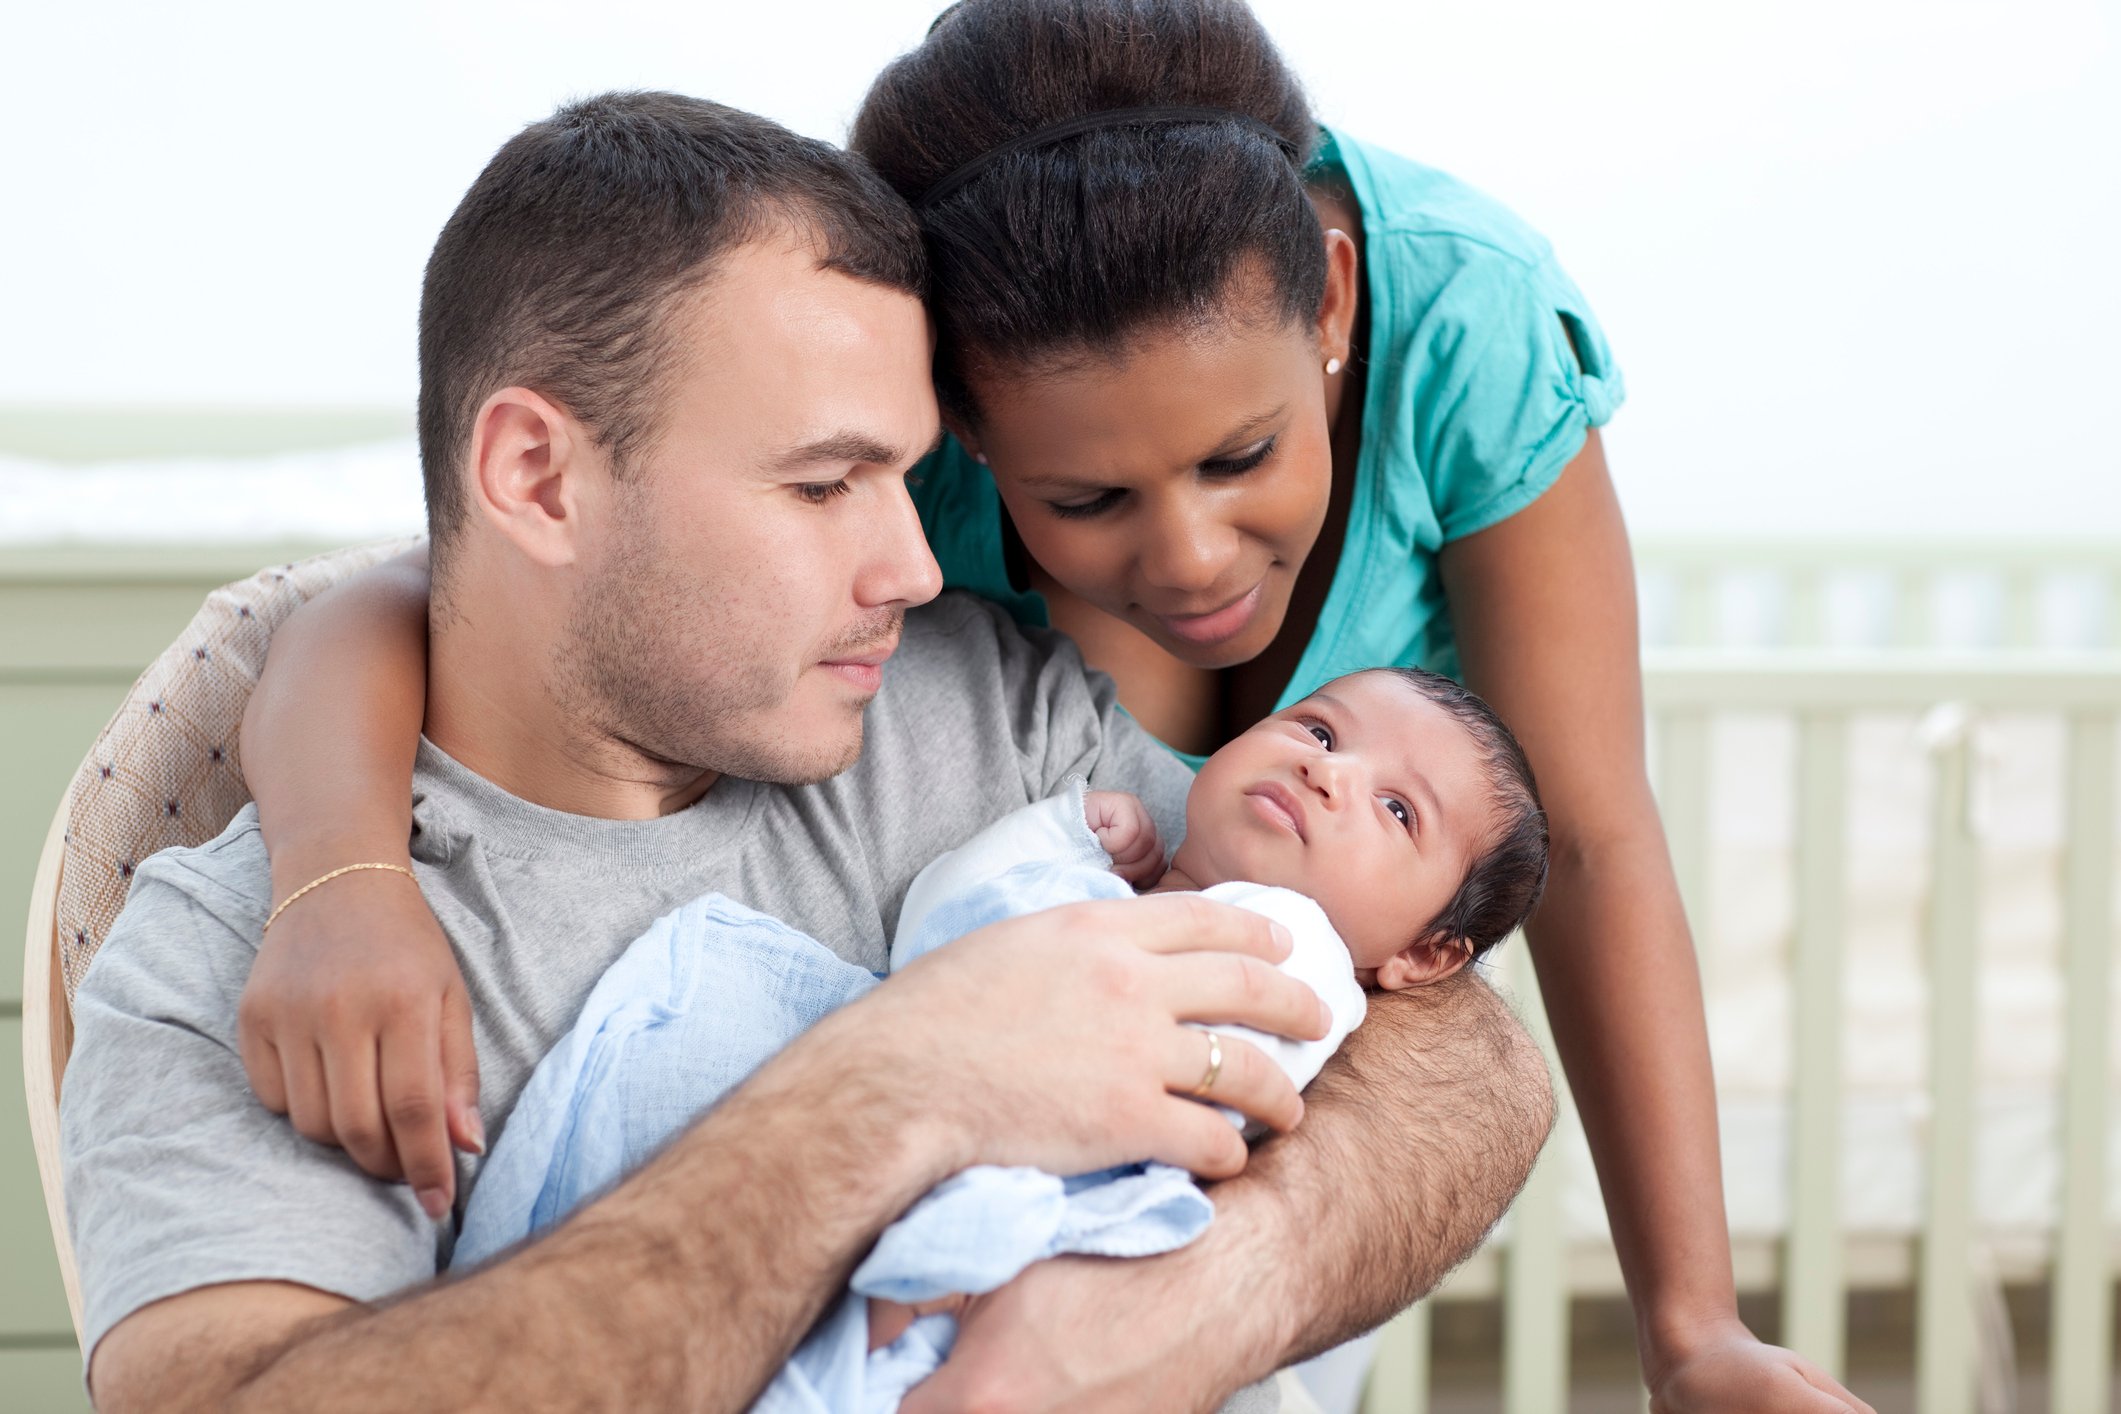 3 Things My White Husband Needs to Know About the Black Baby Were Going to Have